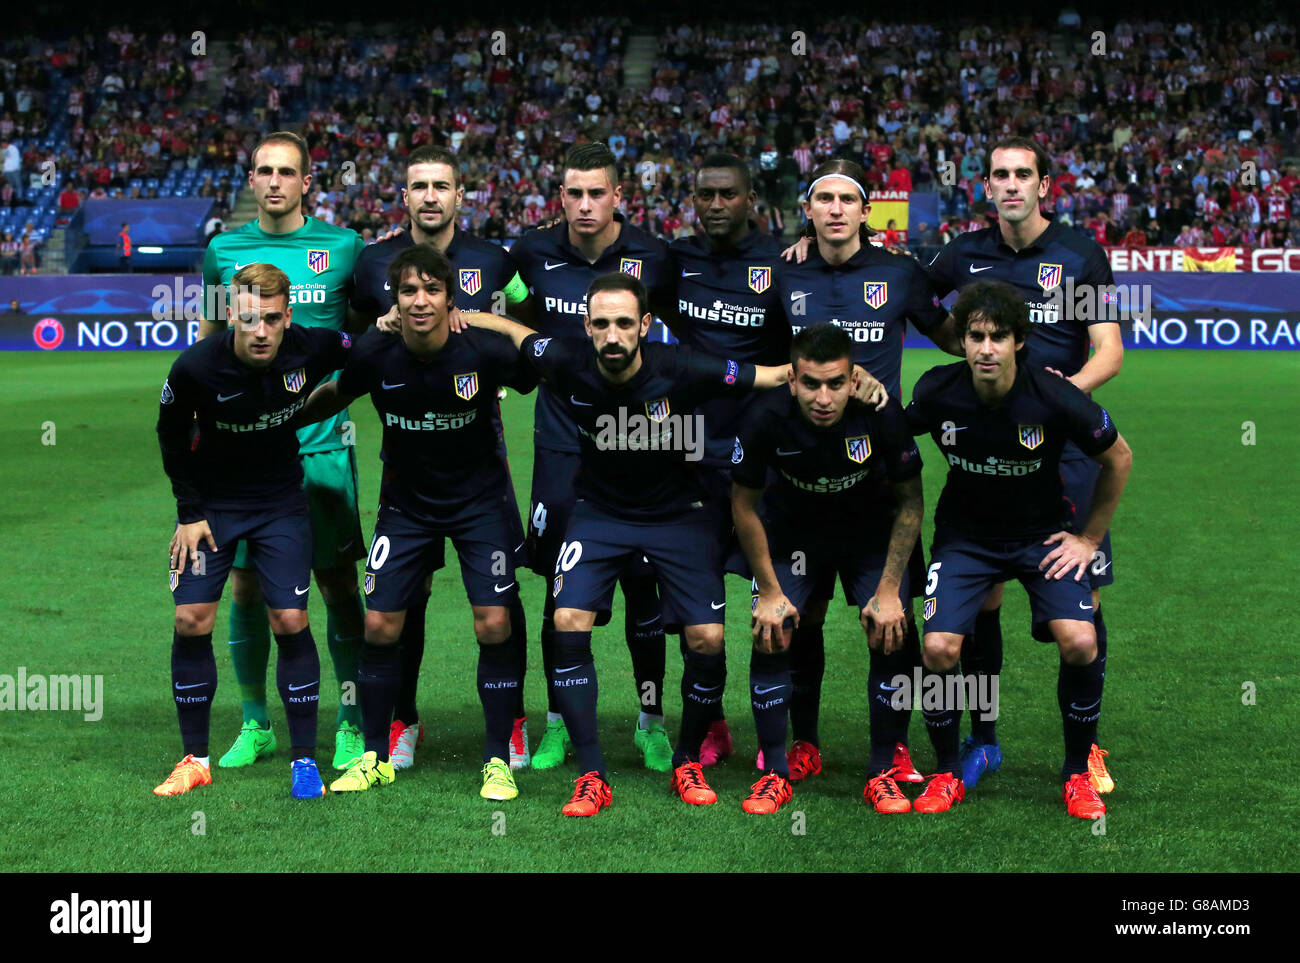 Atletico Madrid team group prior to 2.1 away defeat to SL Benfica Stock Photo